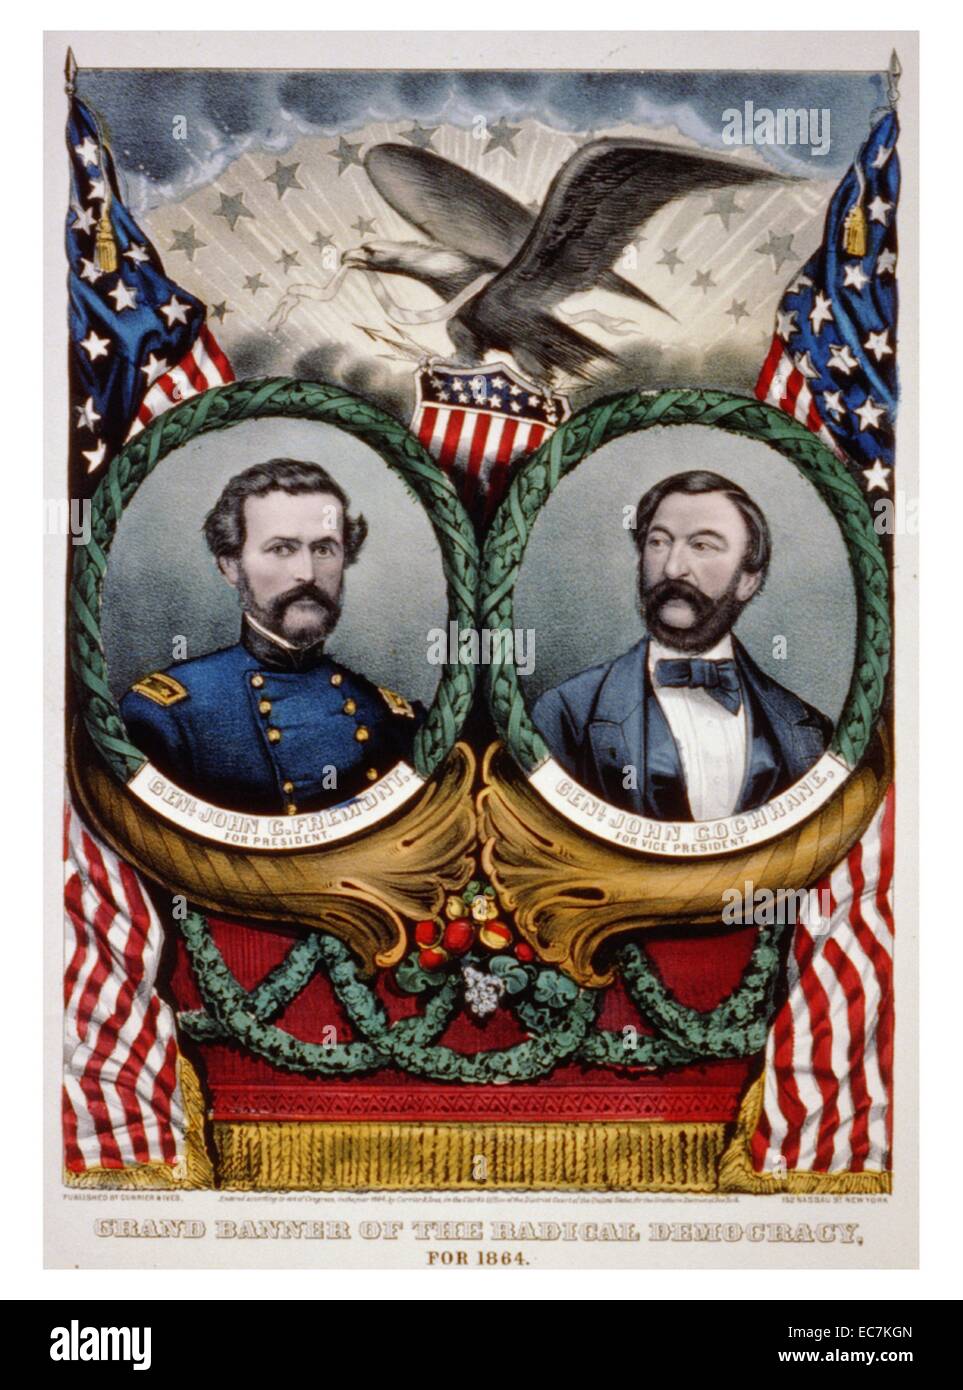 Grand banner of the radical democracy. A campaign banner for presidential nominee John C. Fremont and his running mate John Cochrane. Fremont and Cochrane were the candidates of a faction of radical Democrats that consisted mostly of Germans and abolitionists. Fremont was the first candidate of the anti-slavery Republican Party for the office of President of the United States. Stock Photo